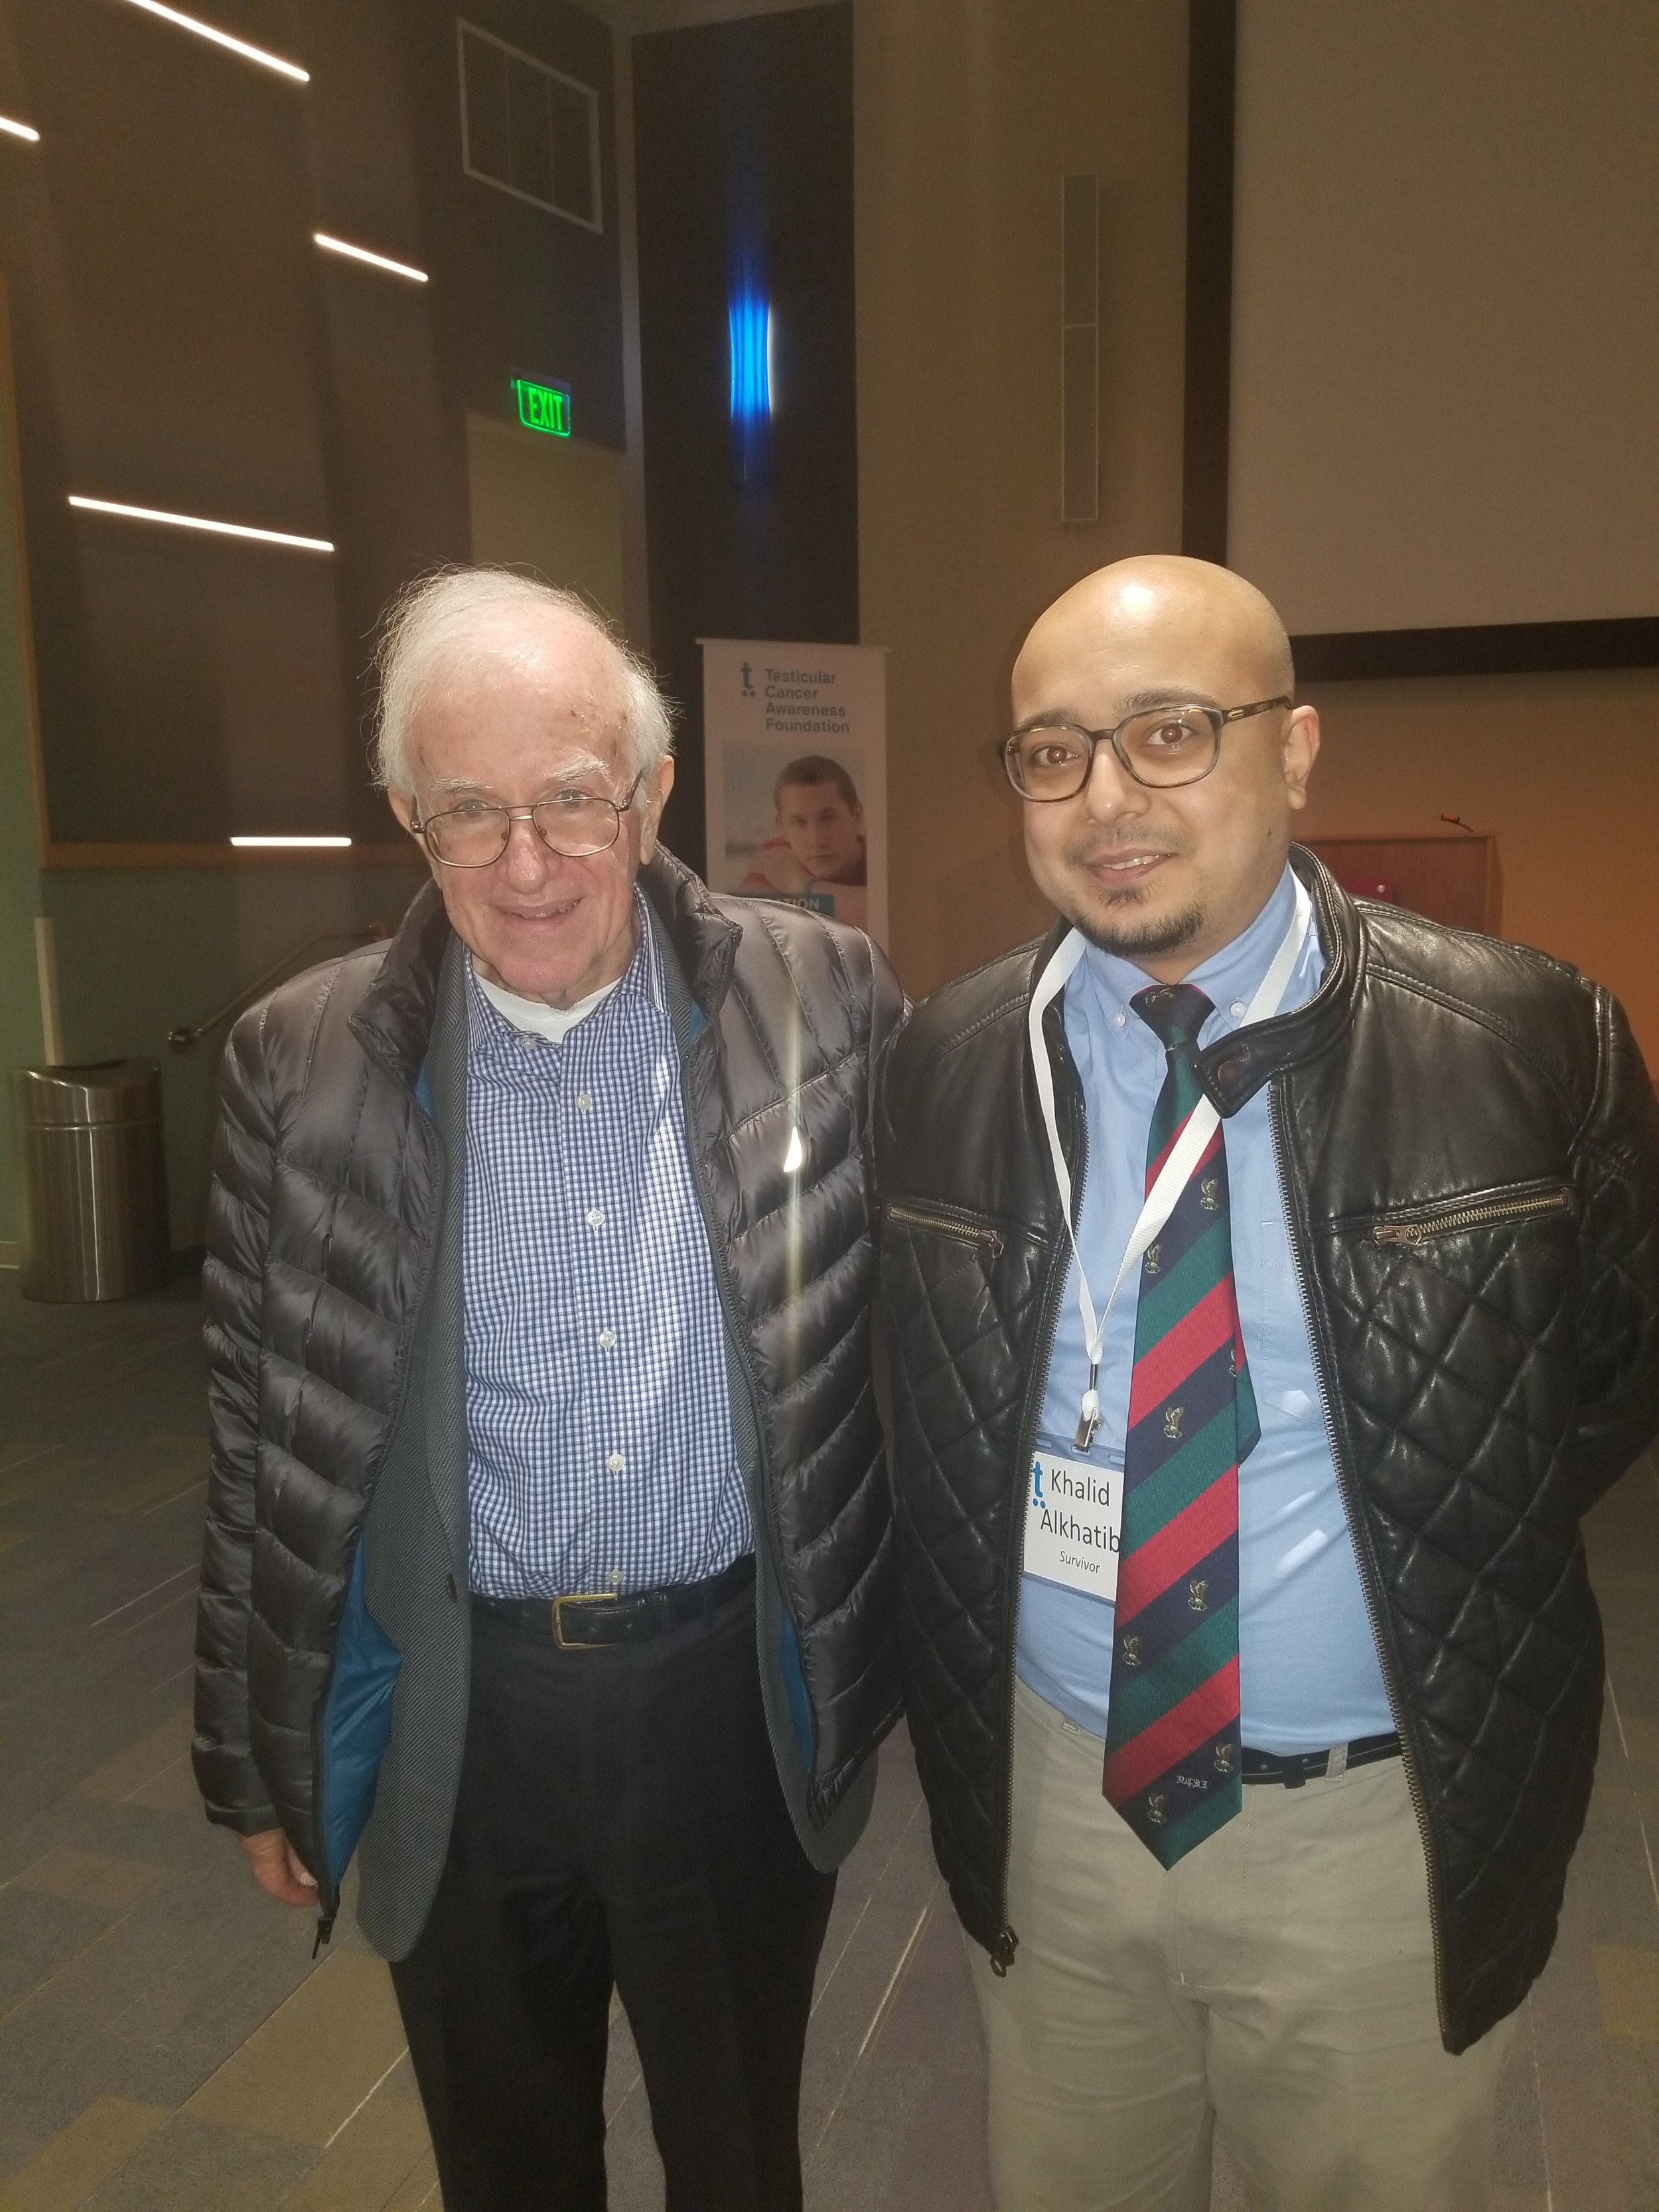 Speakers at Testicular Cancer Conference 2018, Dr. Lawrence Einhorn and Dr. Khalid Alkhatib